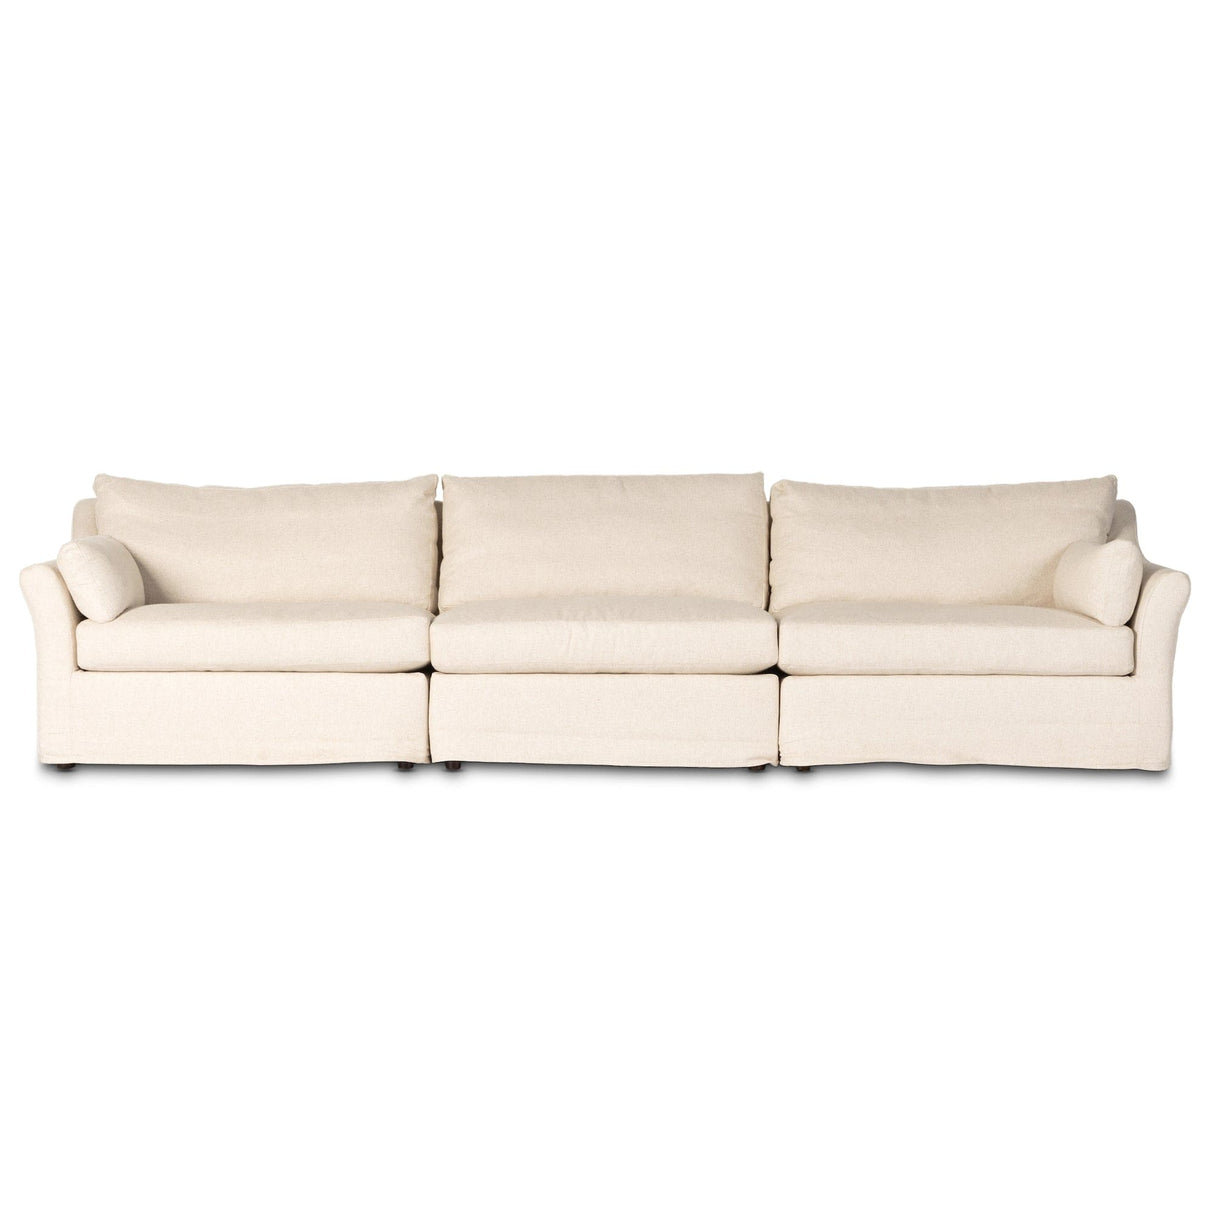 Four Hands Delray 3-Piece Slipcover Sectional Slipcover Chair with Ottoman four-hands-238950-001 801542171551